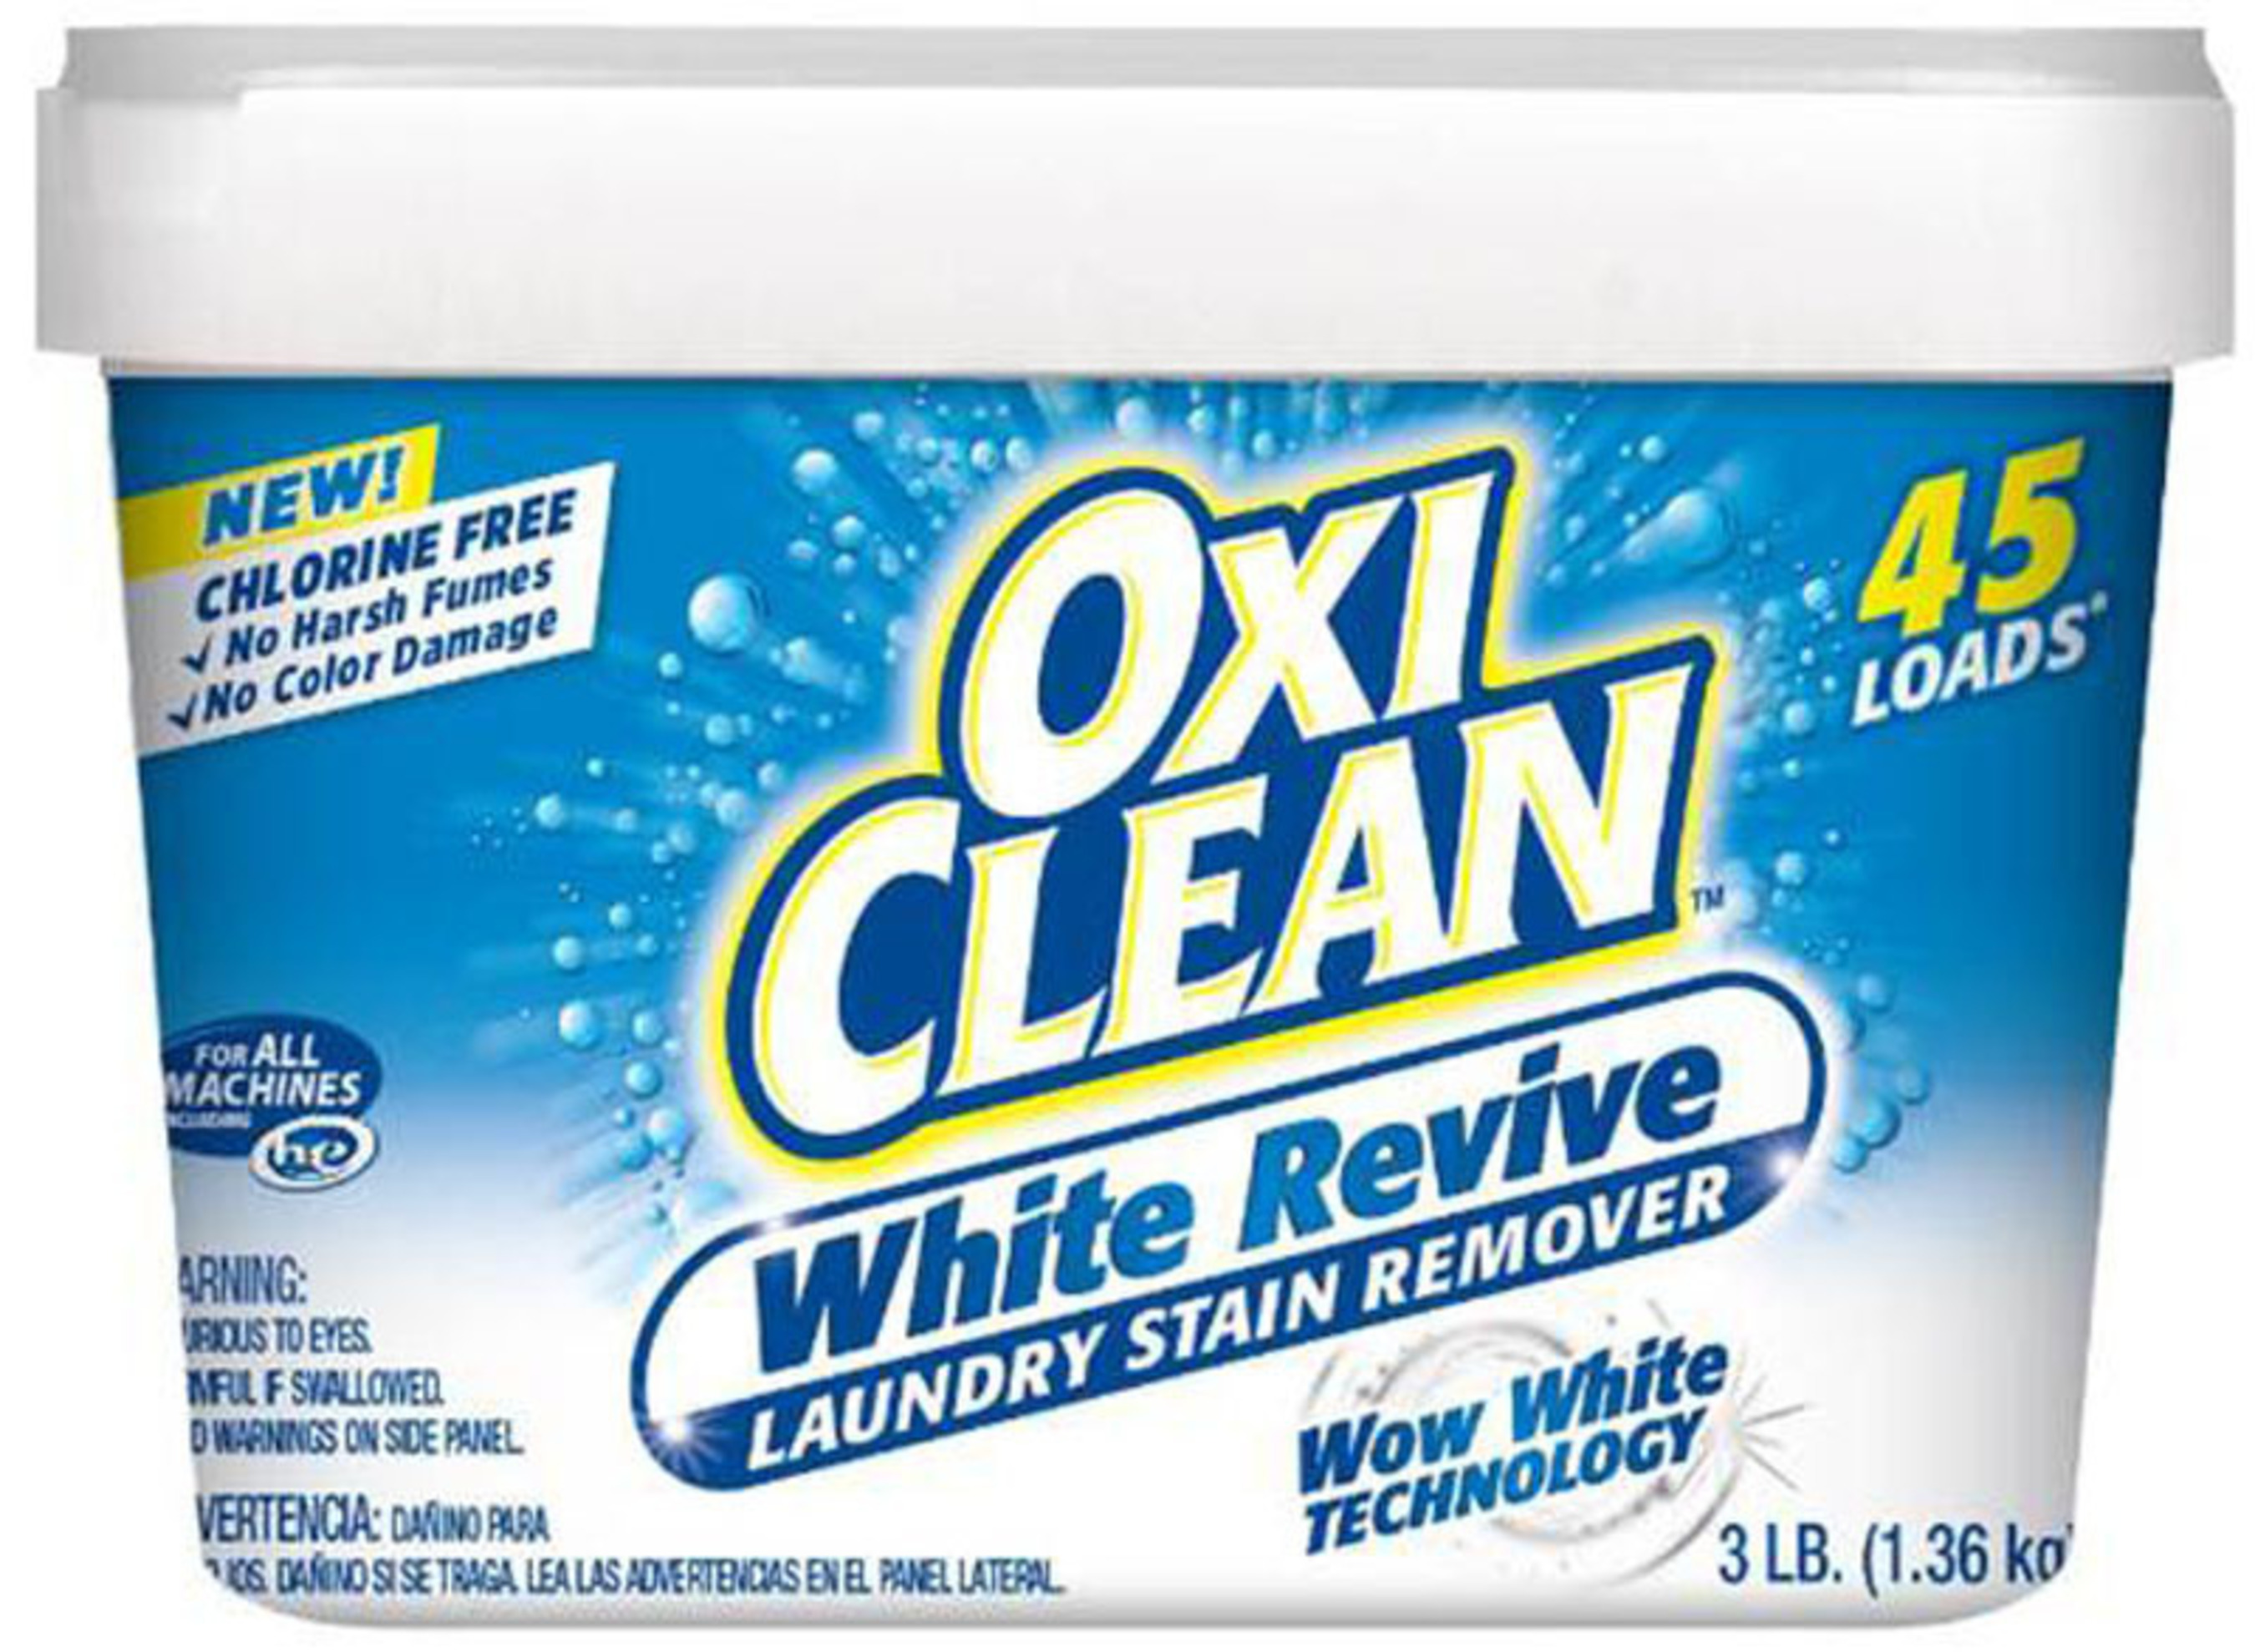 NEW OxiClean White Revive Laundry Stain Remover. (PRNewsFoto/CHURCH _ DWIGHT CO__ INC_)